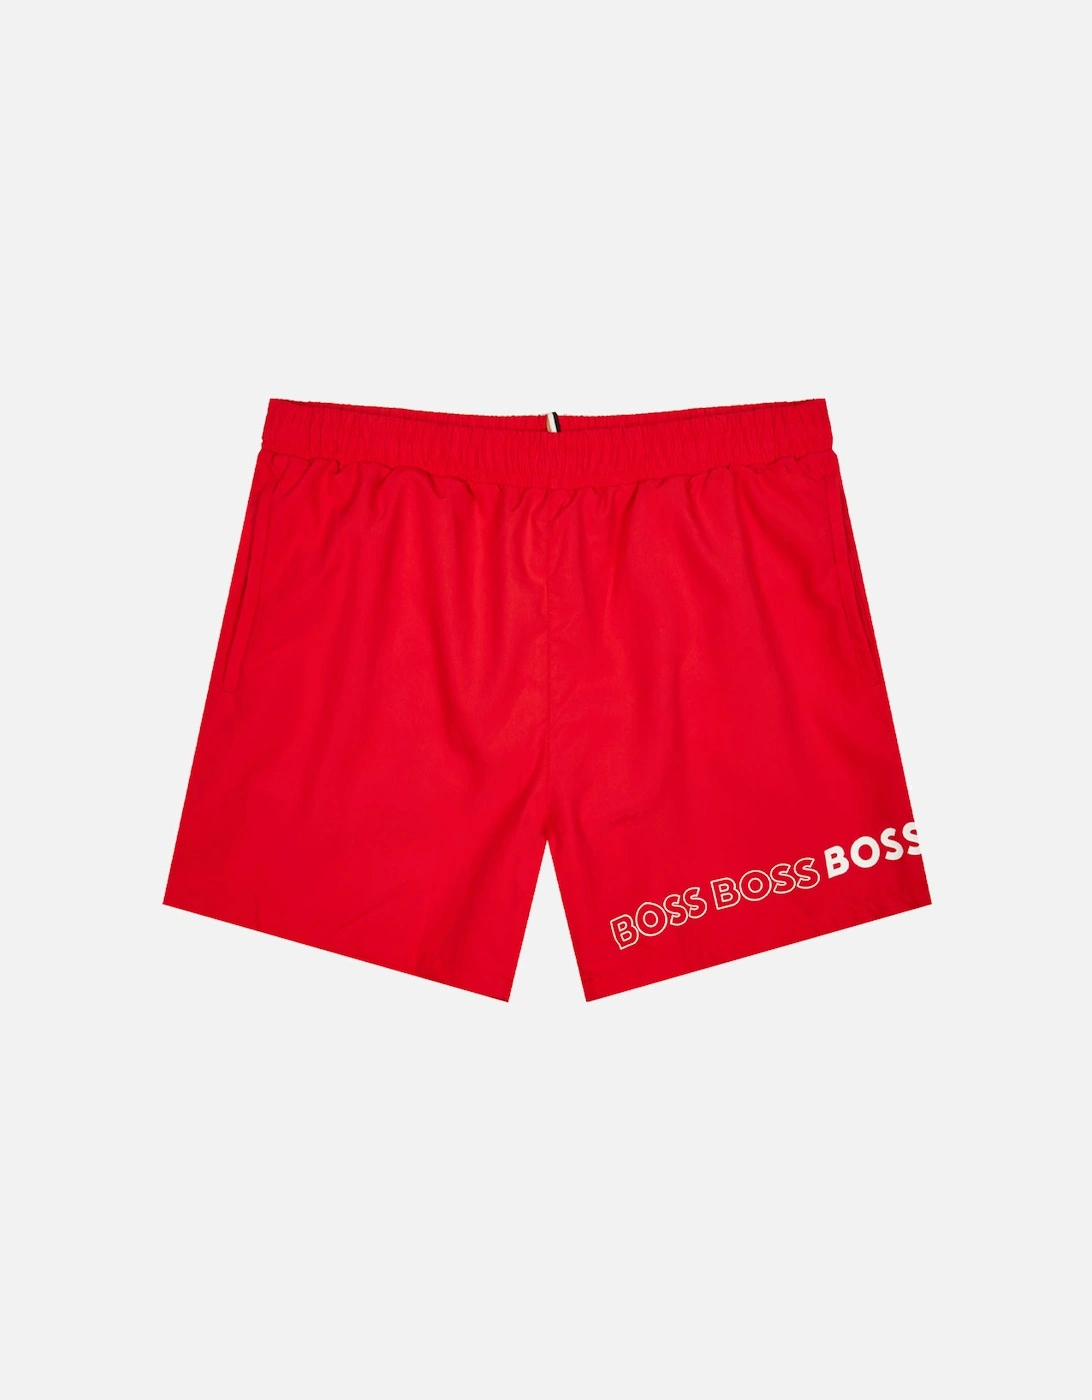 Dolphin Swim Shorts - Bright Red, 9 of 8